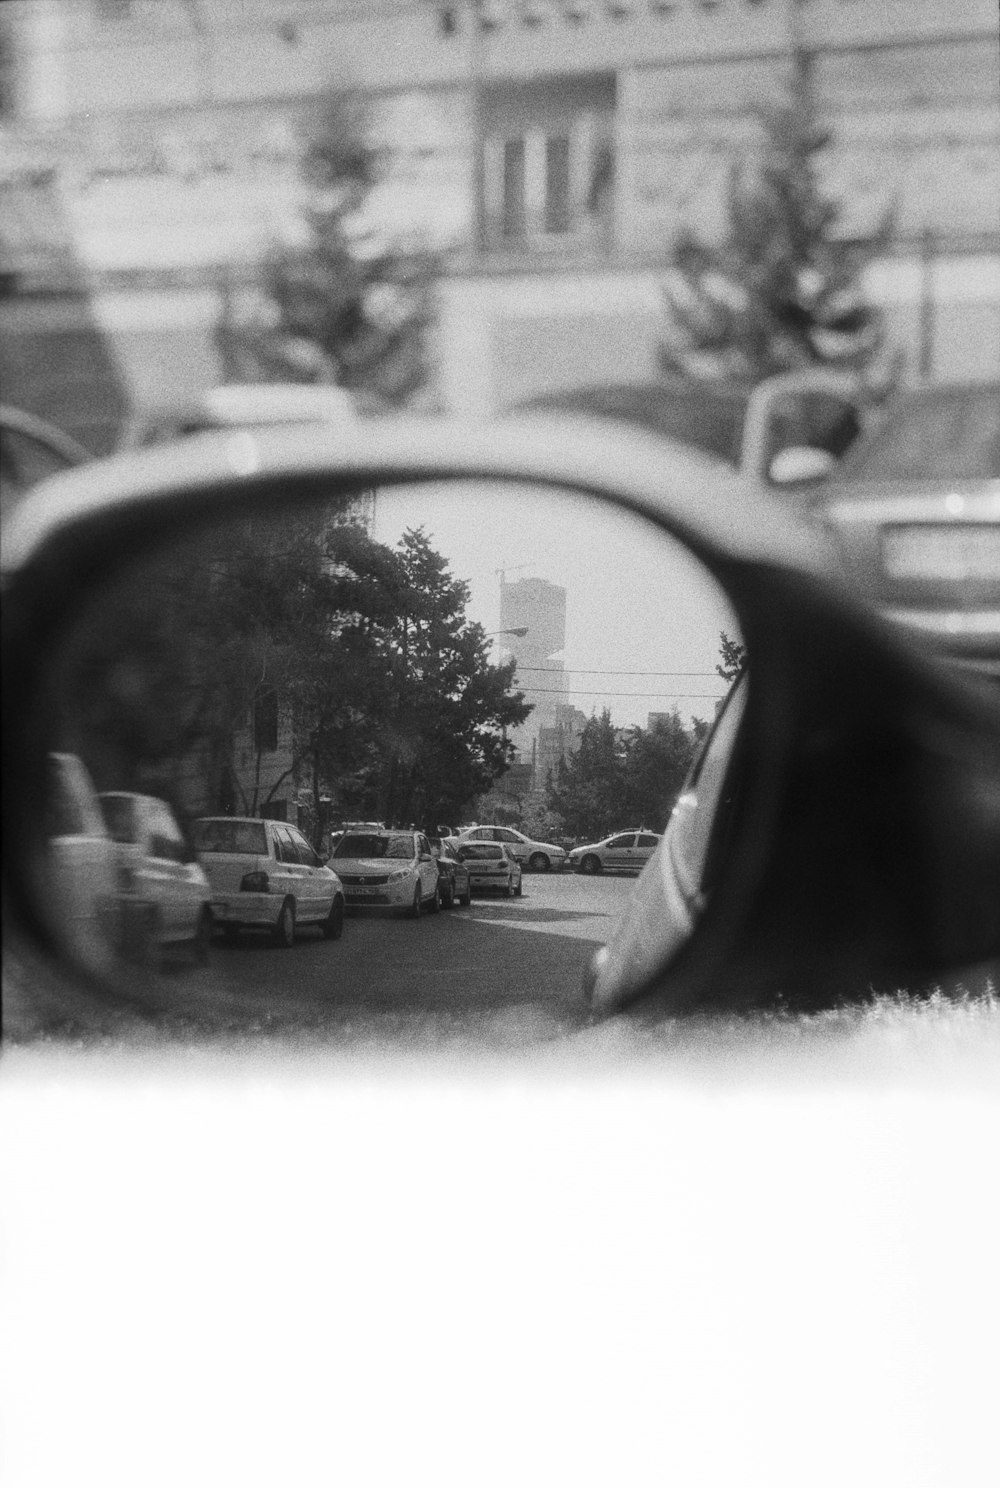 a rear view mirror reflecting cars on a city street